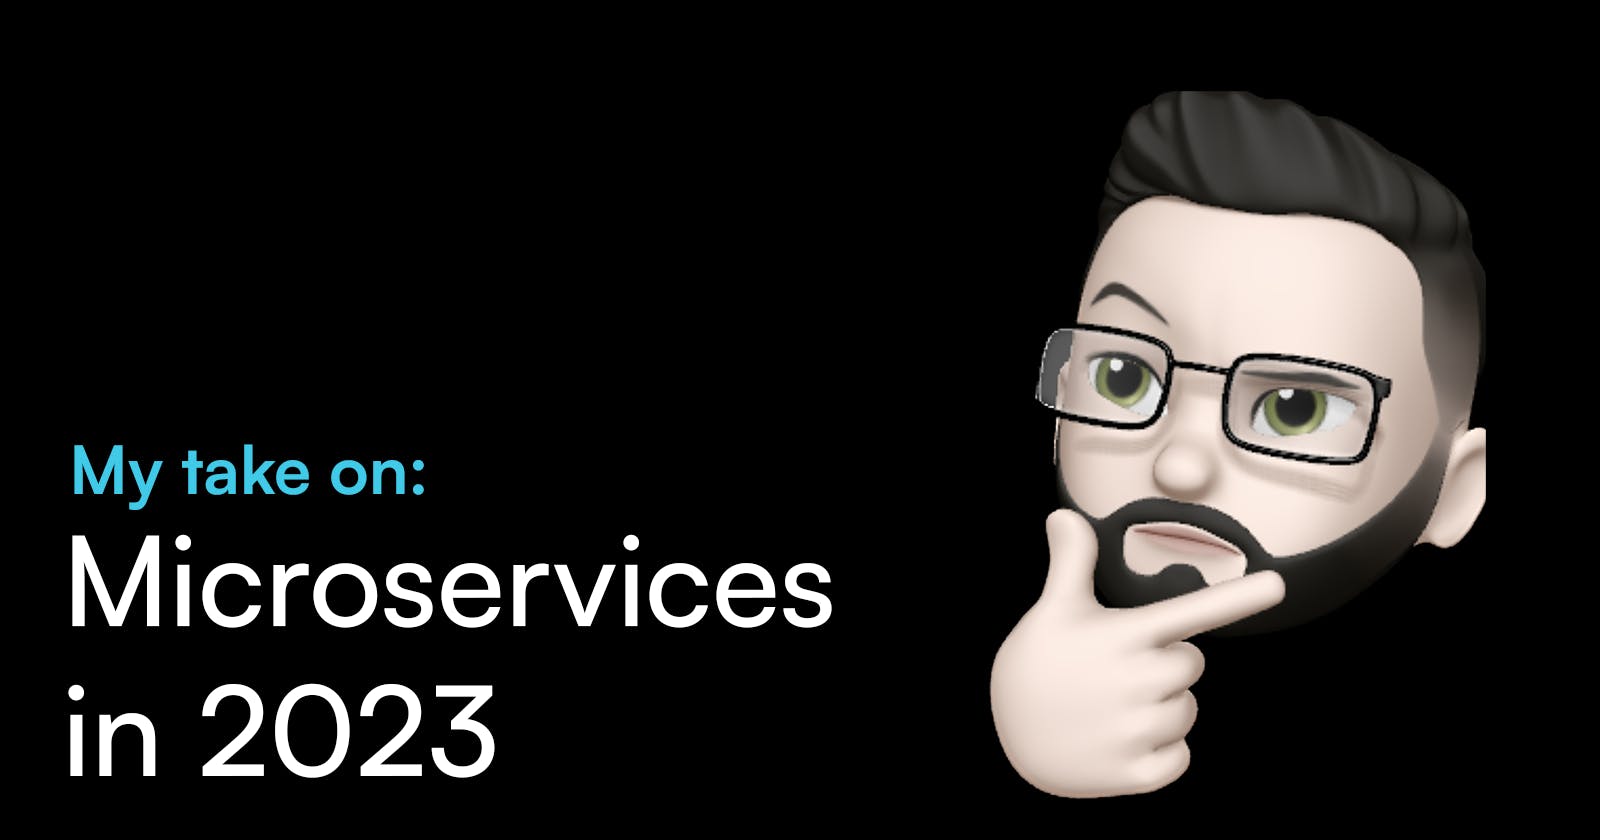 My take on Microservices in 2023